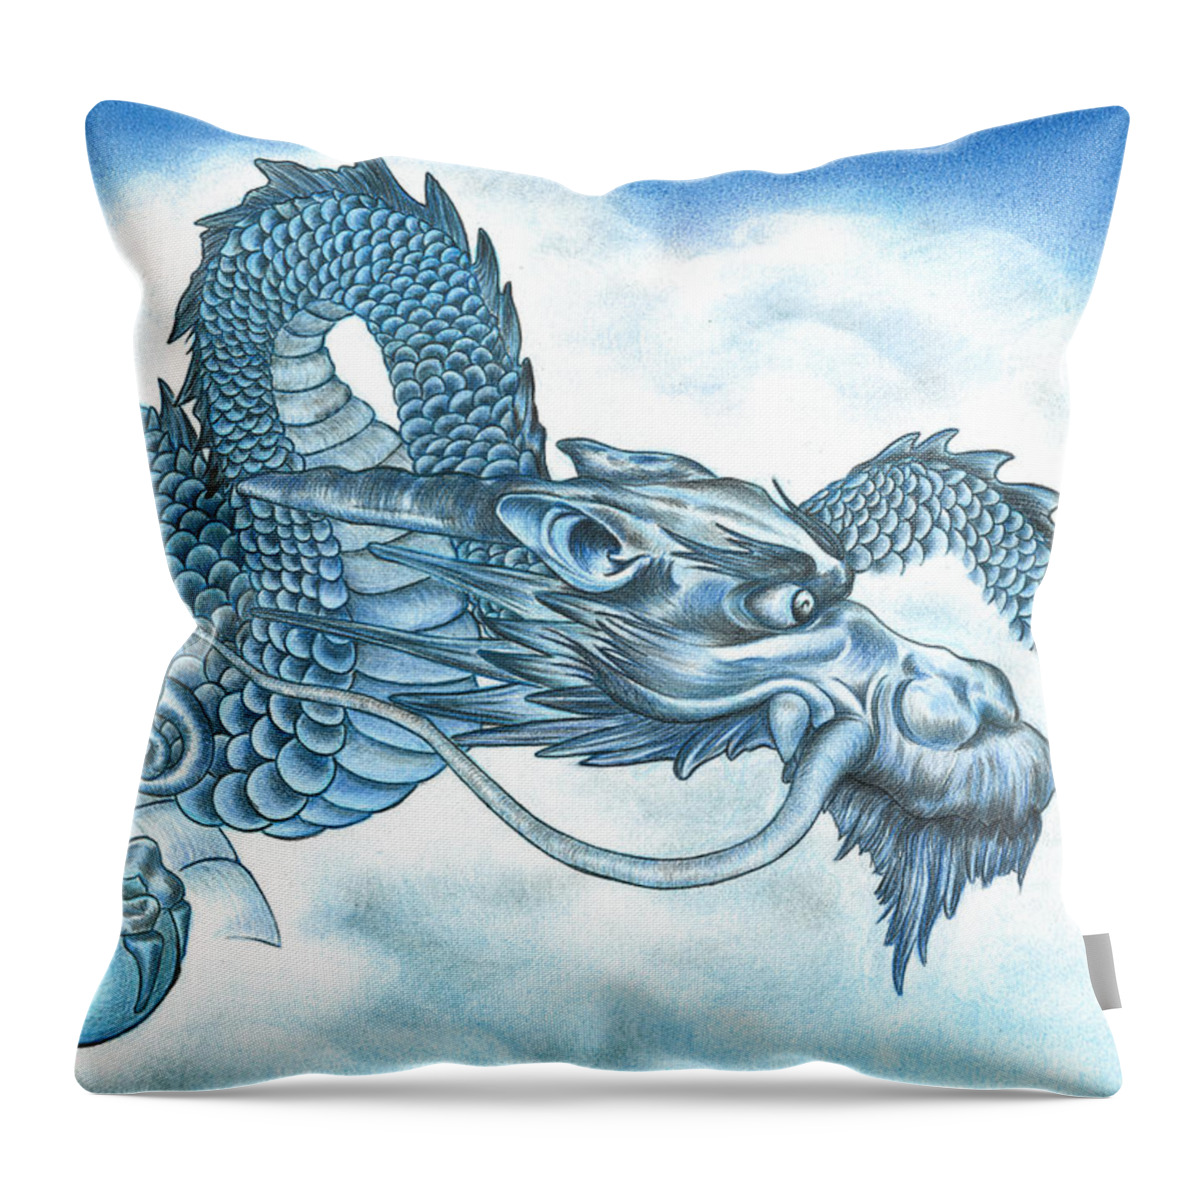 Blue Dragon Throw Pillow featuring the drawing The Blue Dragon by Troy Levesque